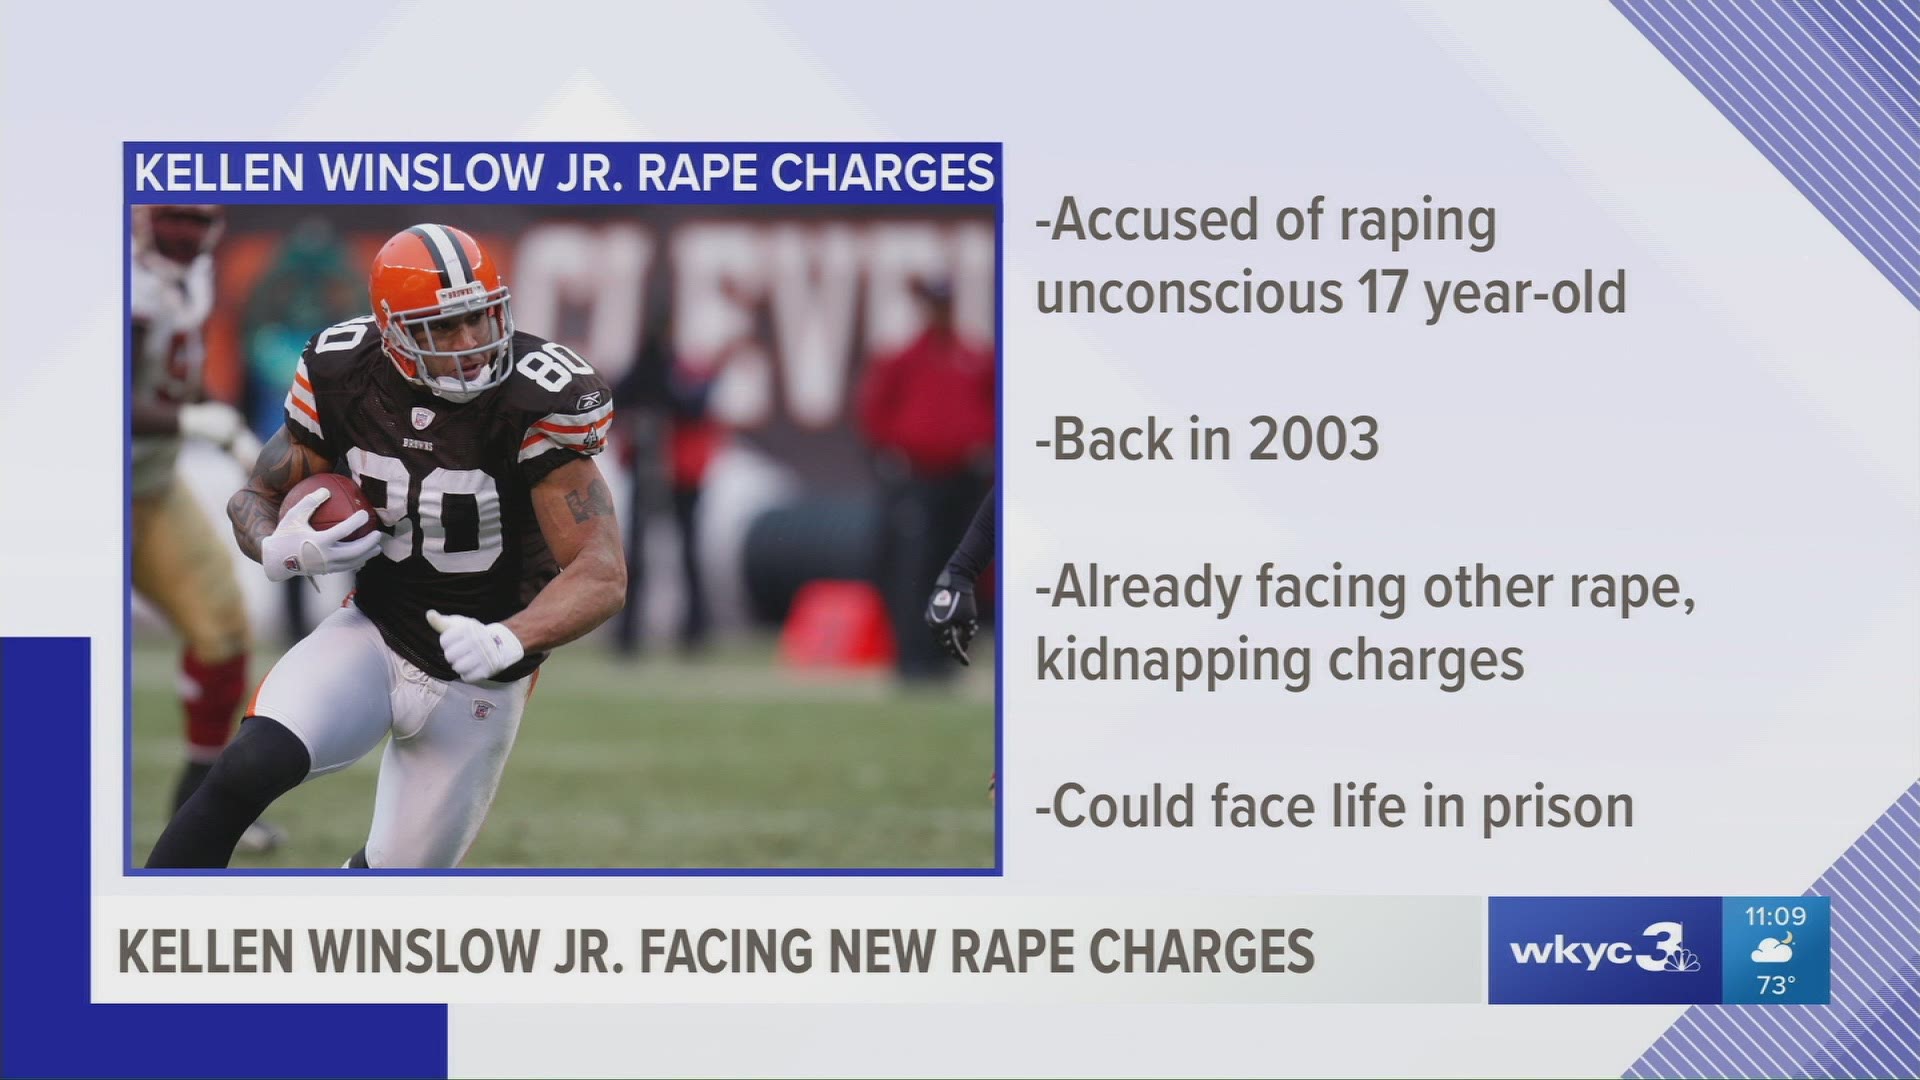 Former Cleveland Browns TE Kellen Winslow II charged with 2003 rape of unconscious 17-year-old